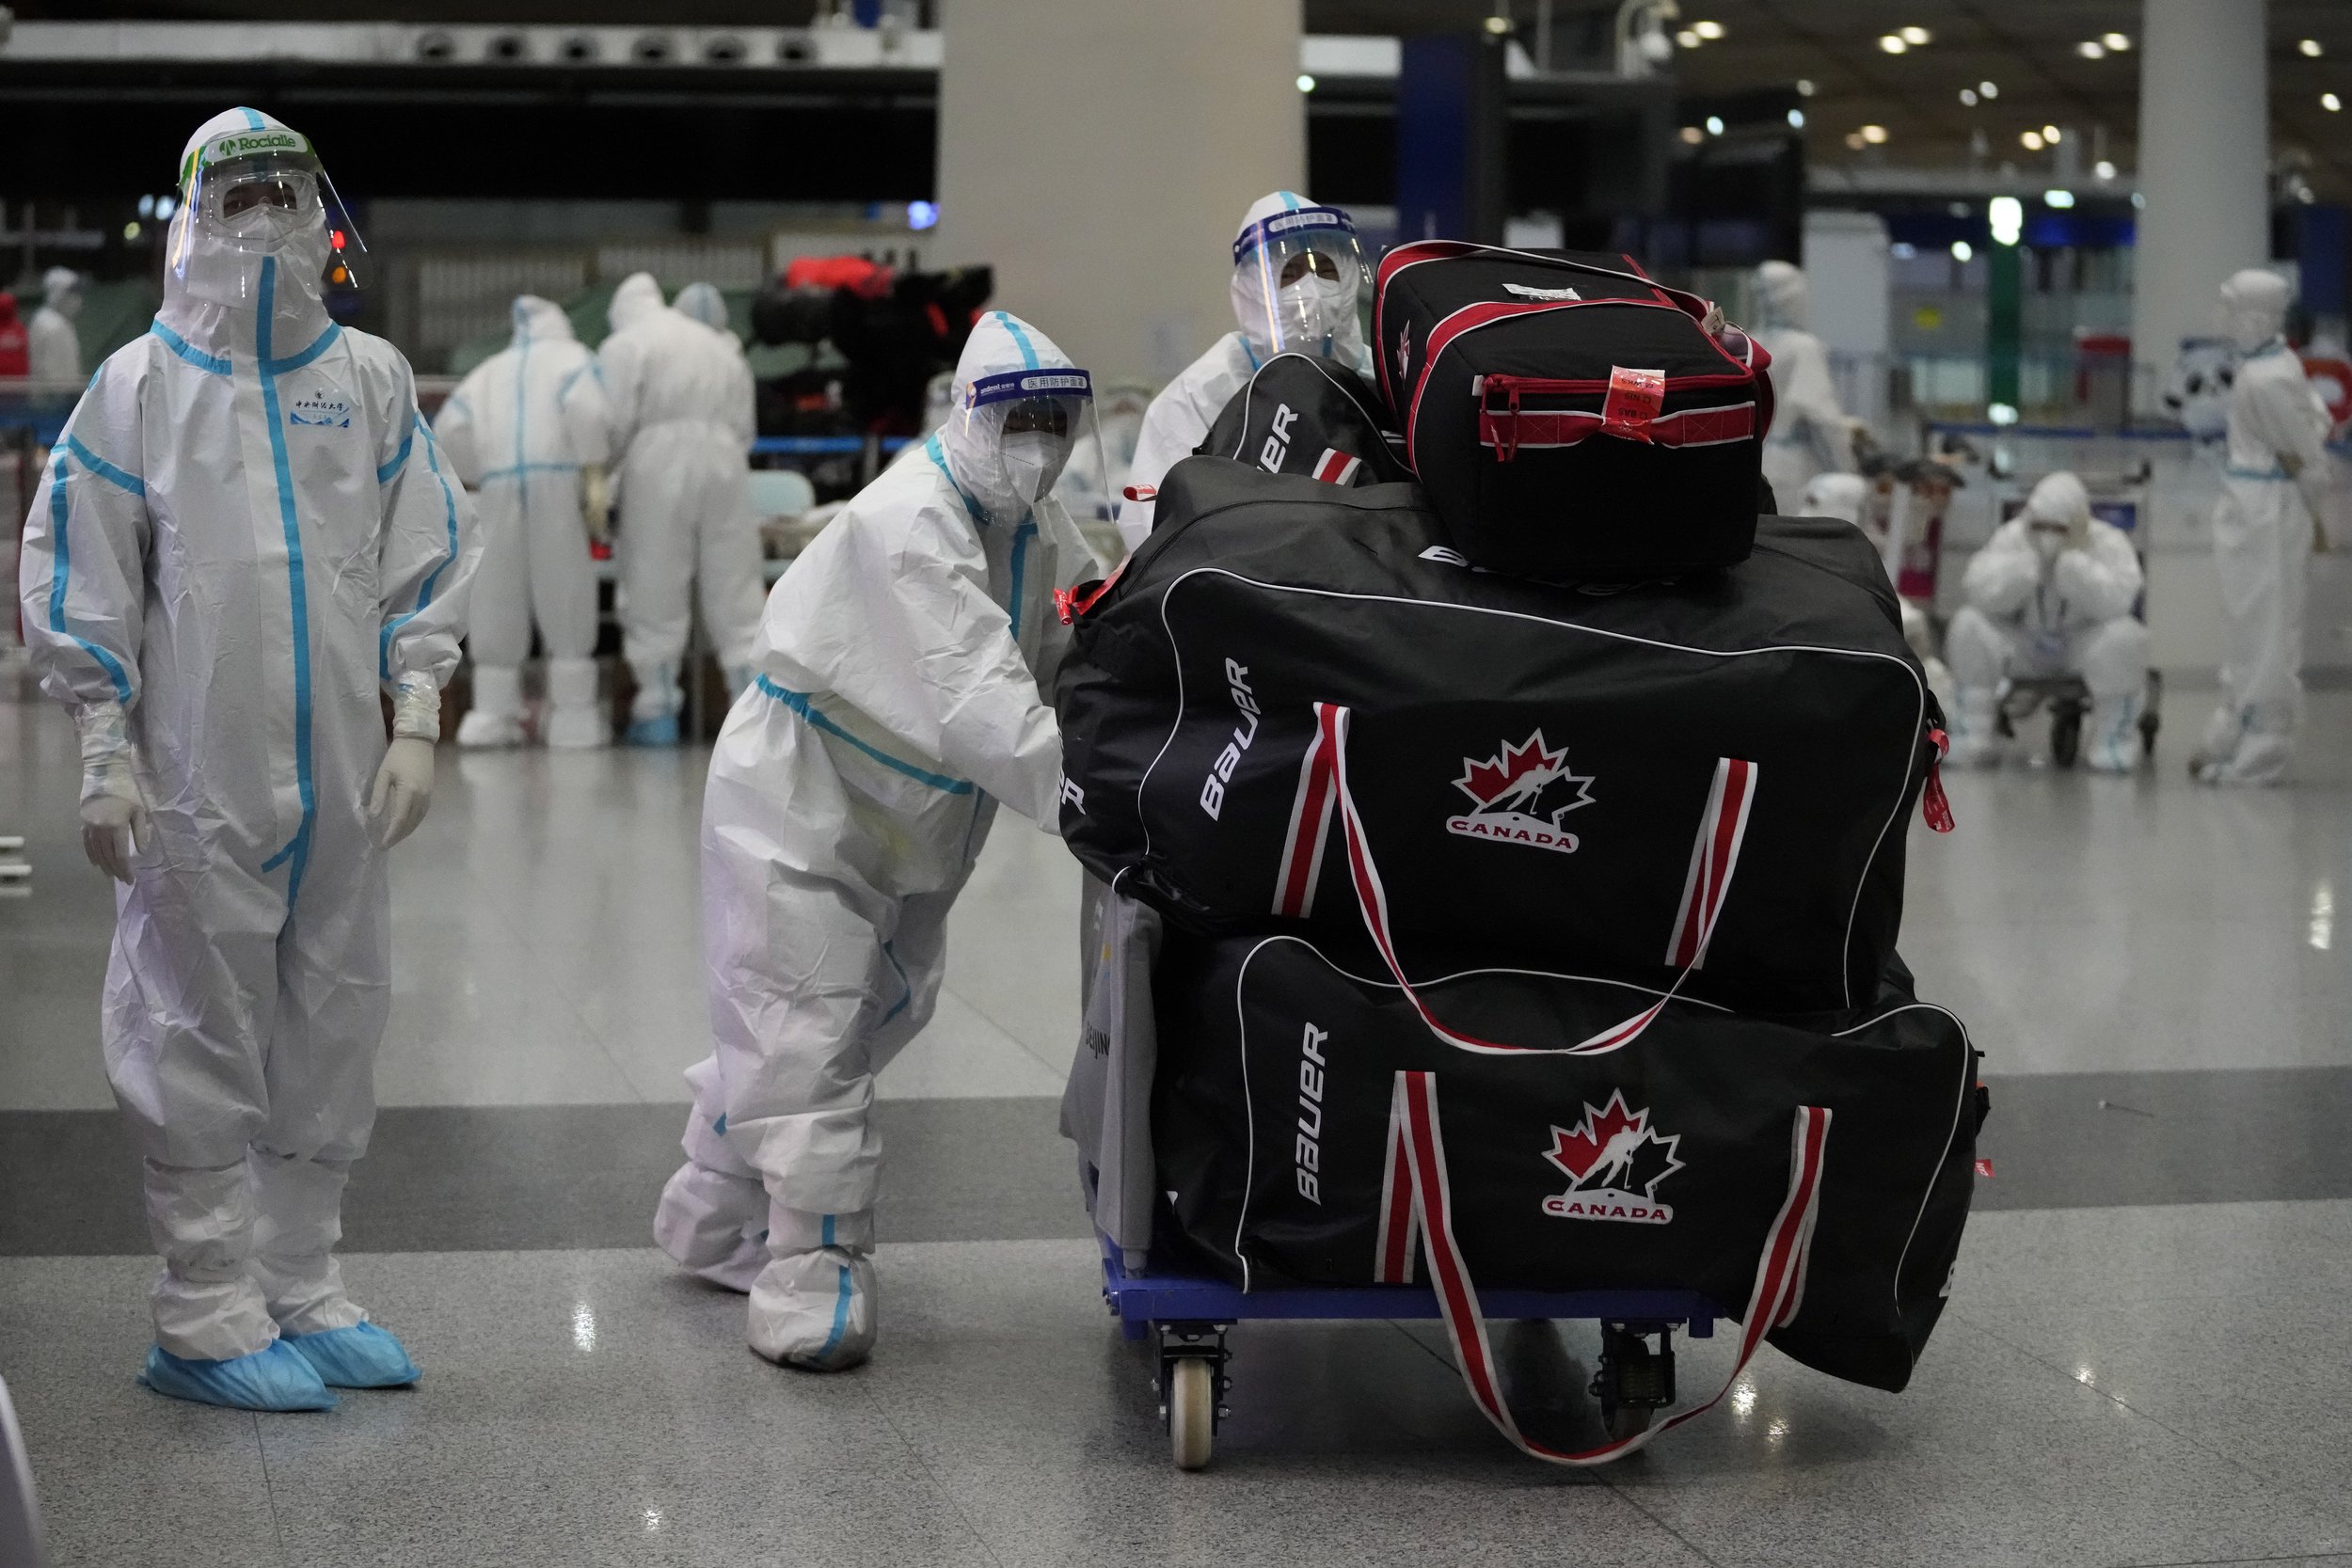  Olympic workers in protective clothing help travelers at Beijing Capital International Airport after the 2022 Winter Olympics, Monday, Feb. 21, 2022, in Beijing, China. (AP Photo/Frank Augstein) 